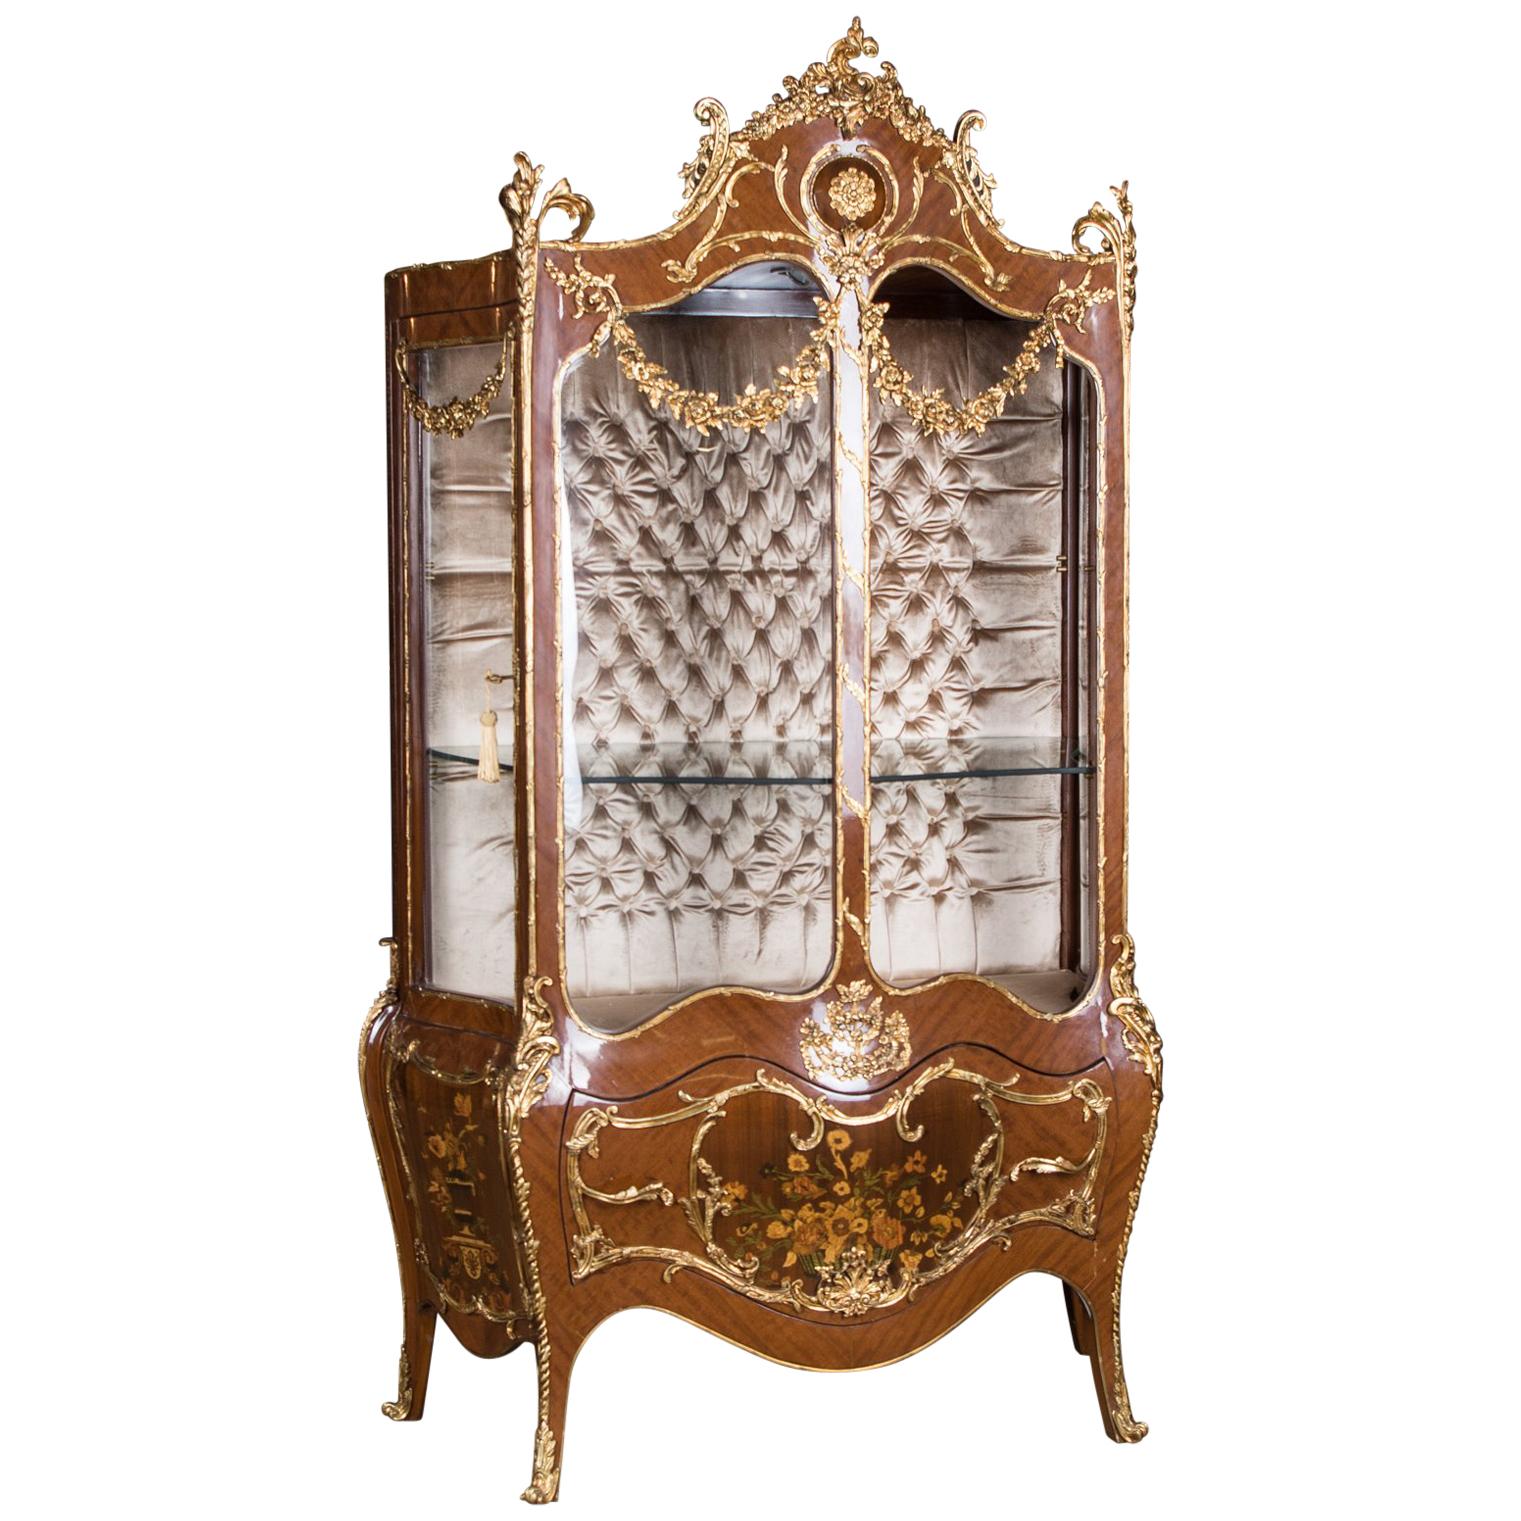 Majestic French Display Case in the Style of the 18th Century, Louis Quinze